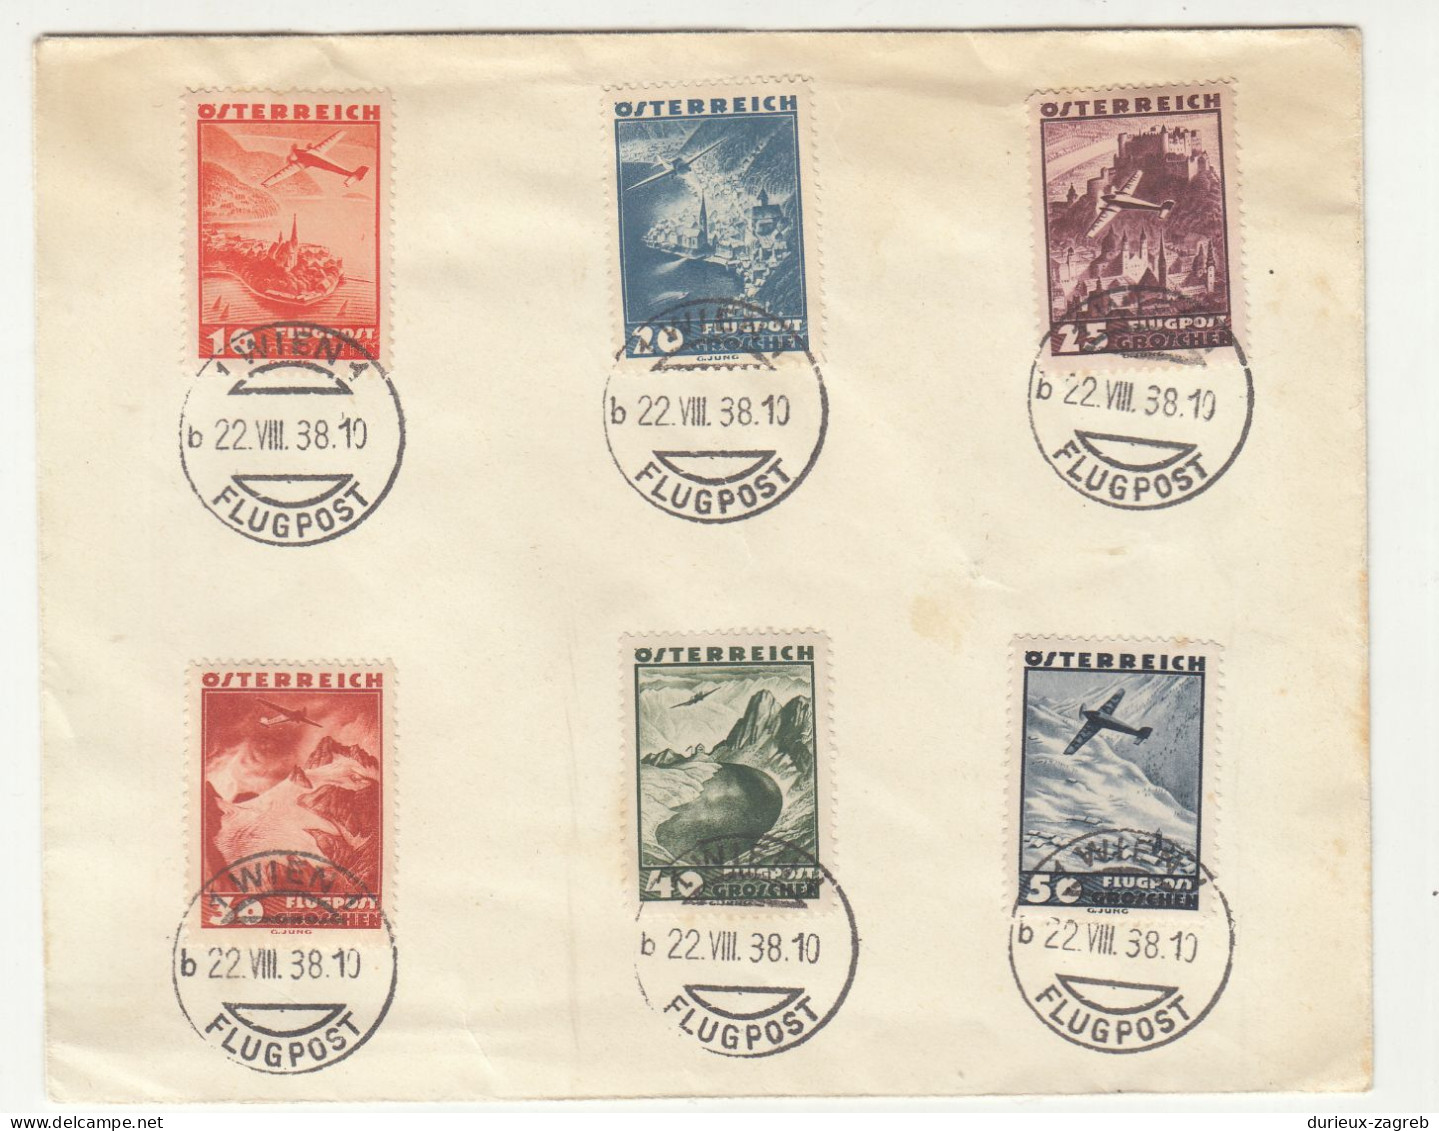 Austria 1938 Air Mail Stamps Postmarked On Letter Cover Not Posted B240401 - Usati